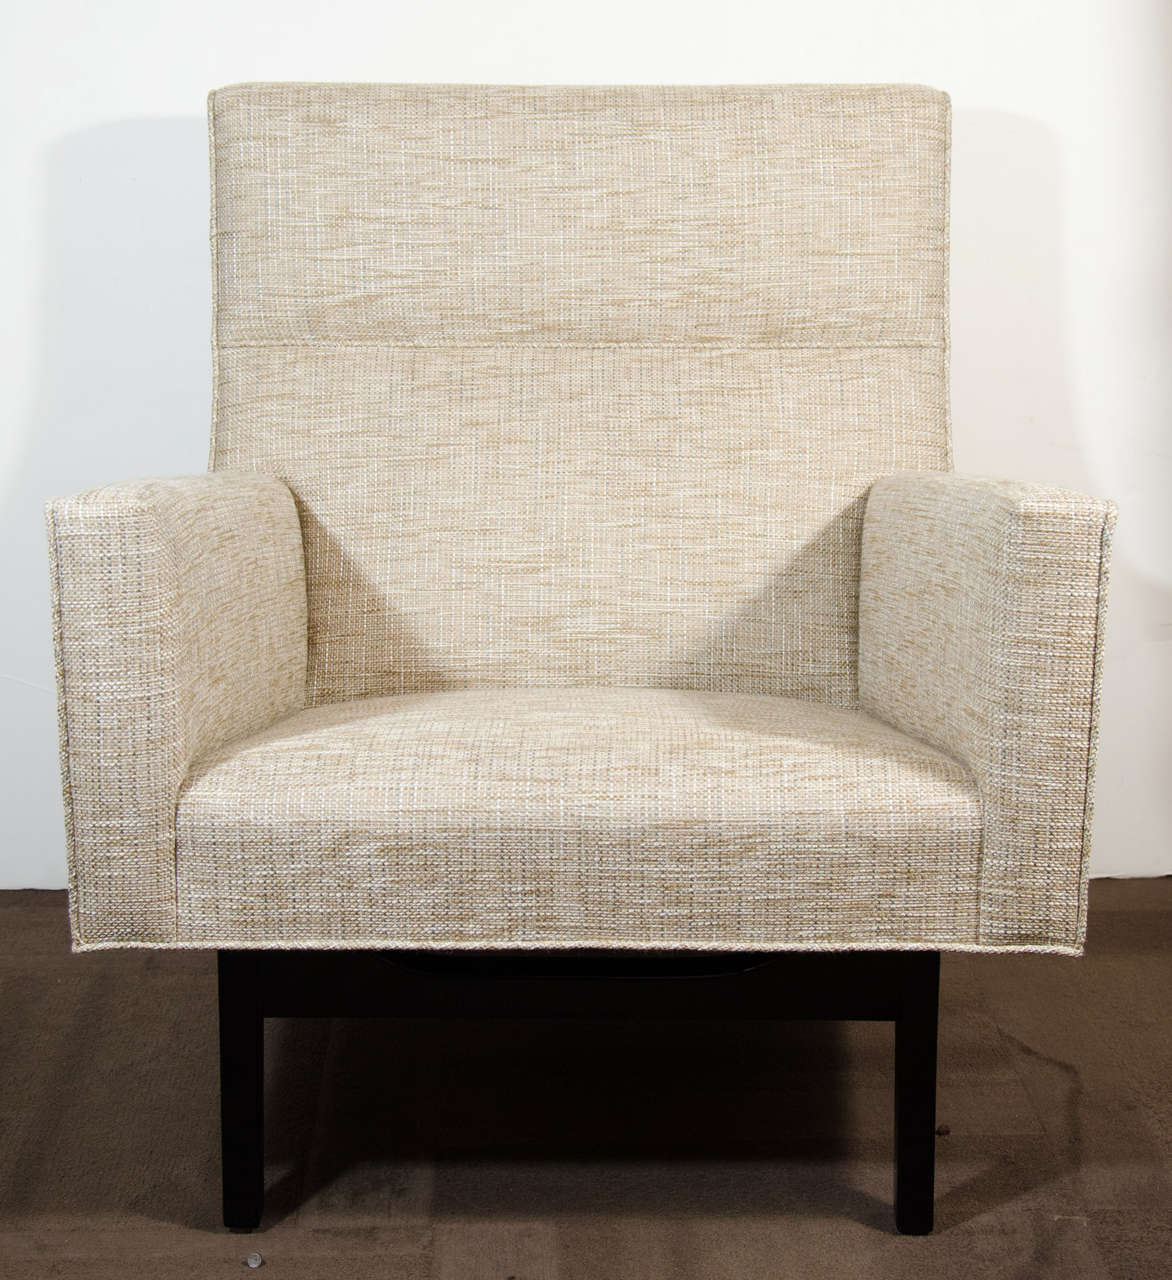 Outstanding modernist lounge chair with sculptural design.  The chair features highly angled lines as well as a striking base and leg design in walnut wood with an ebony finish. Newly upholstered in a fine woven tweed fabric in hues of ecru, ivory,